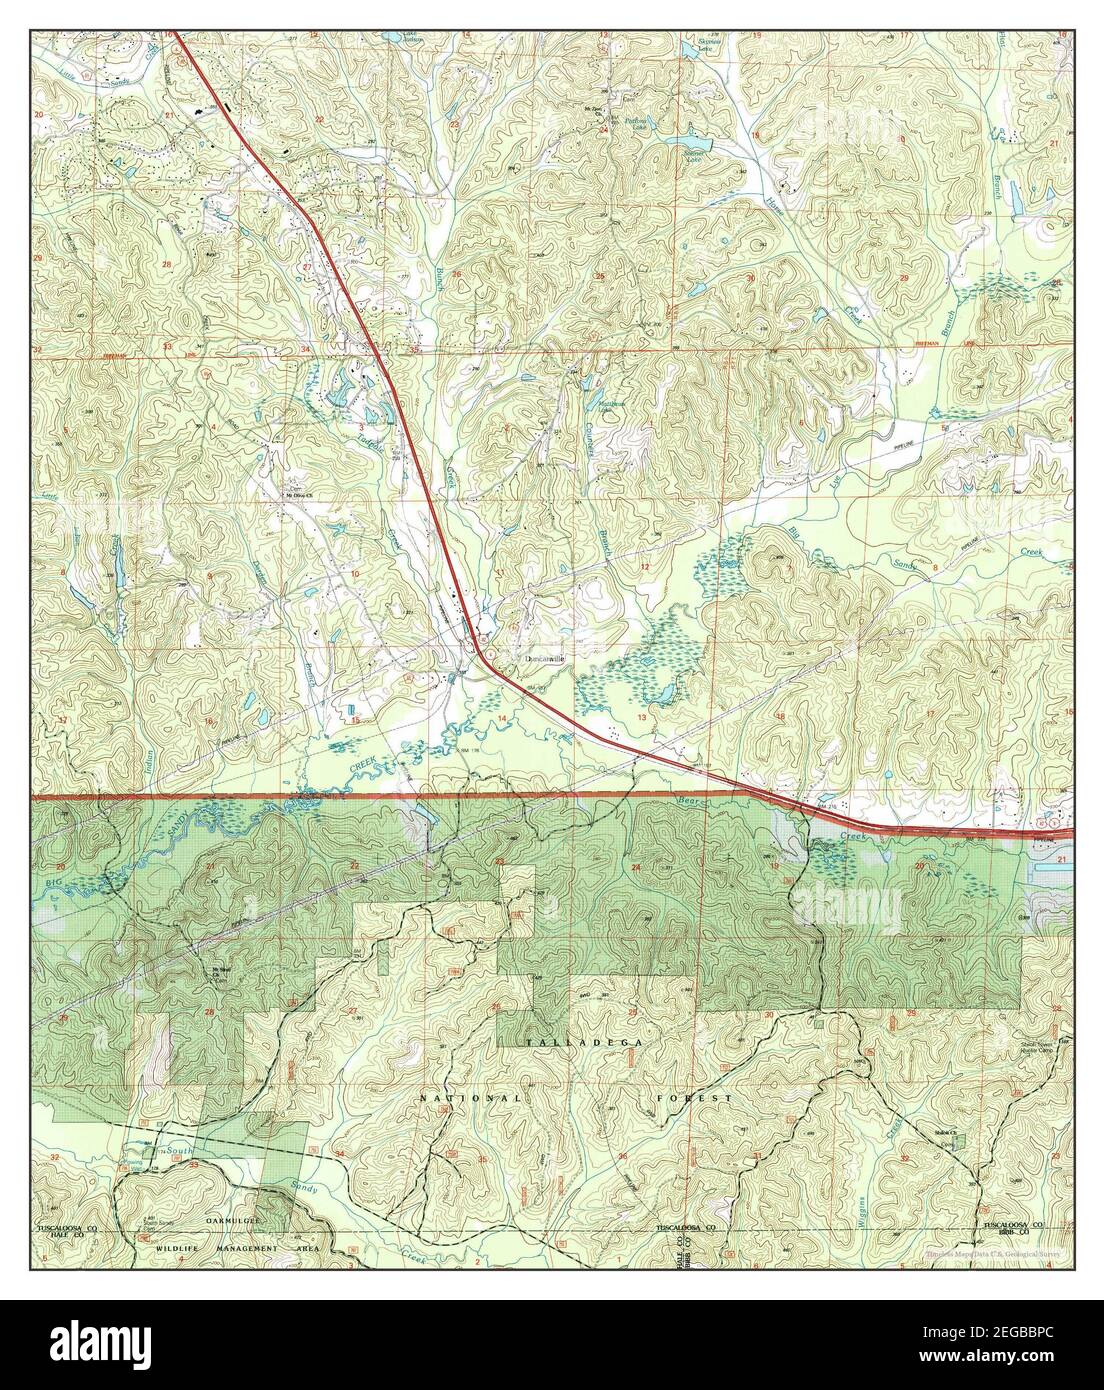 Duncanville, Alabama, map 2002, 1:24000, United States of America by Timeless Maps, data U.S. Geological Survey Stock Photo